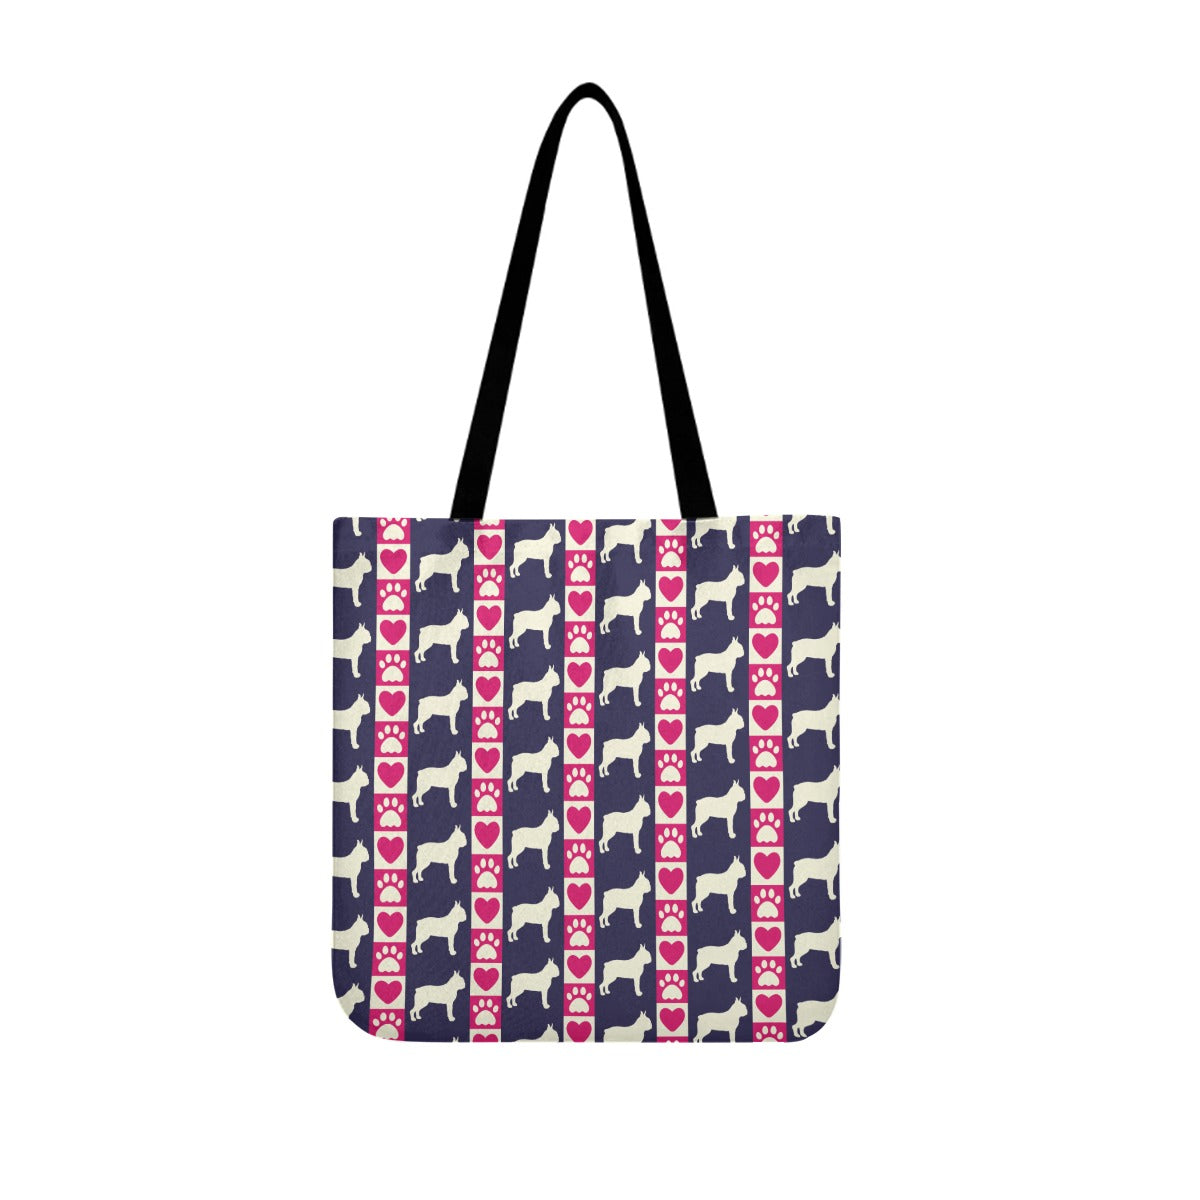 Maisie - Cloth Tote Bags for Boston Terrier lovers